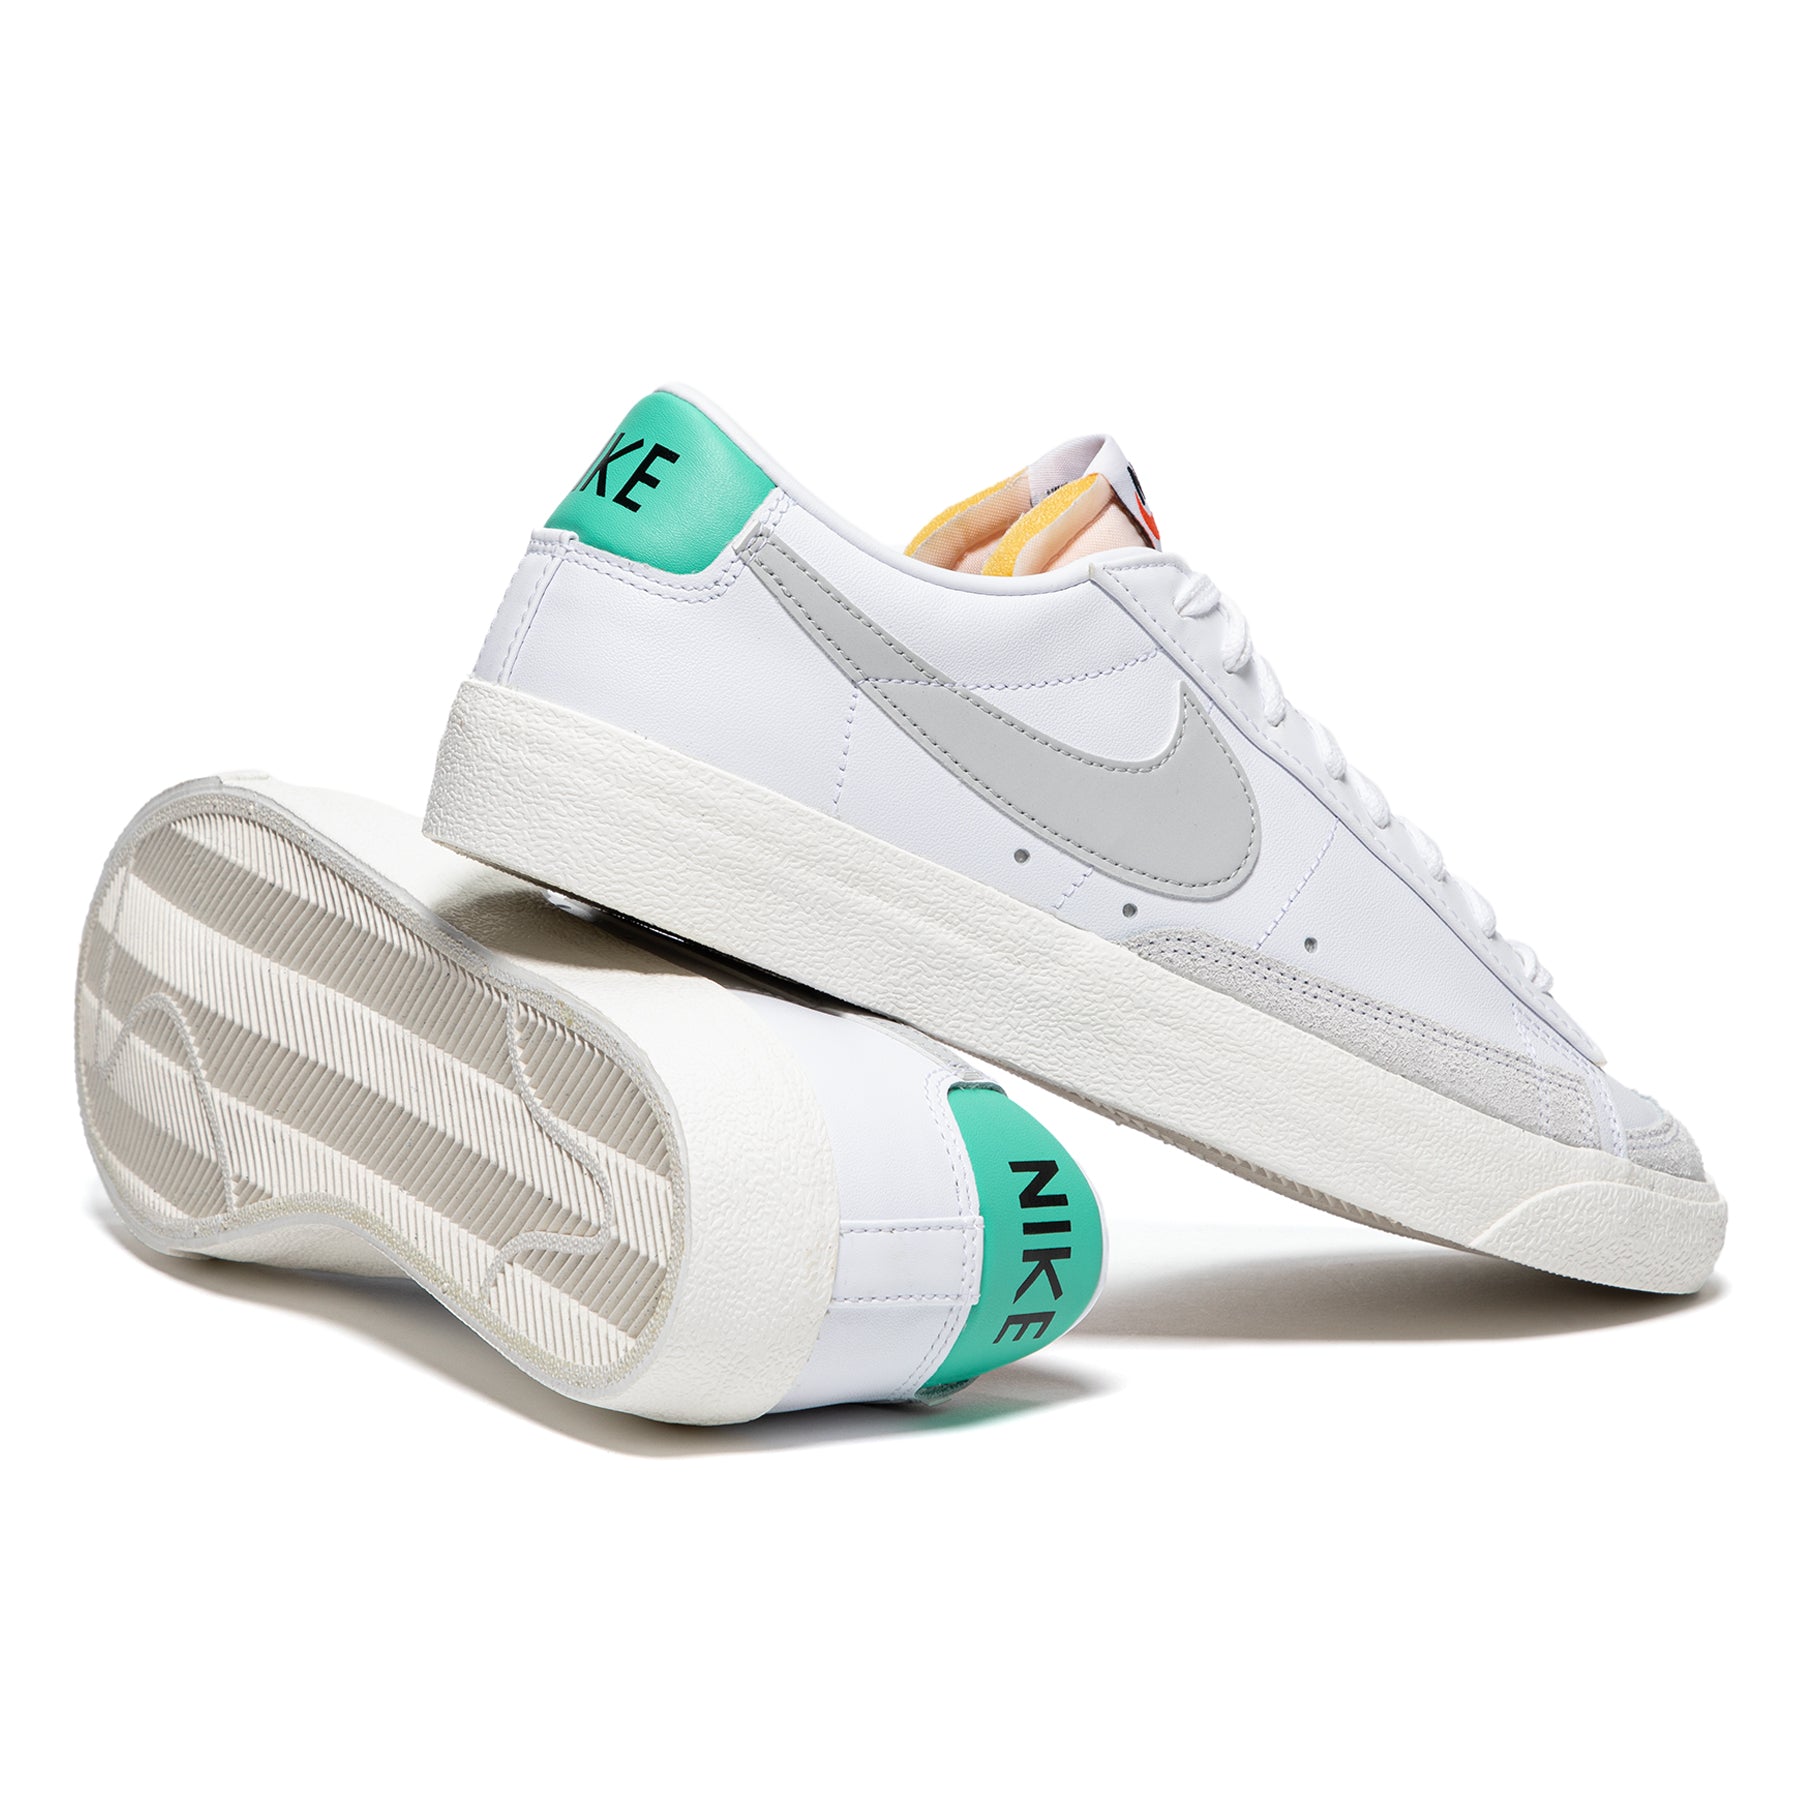 022 - GmarShops - the Nike Blazer continues to surprise - Nike Air Force 1  07 Low White Grey Silver LV0506